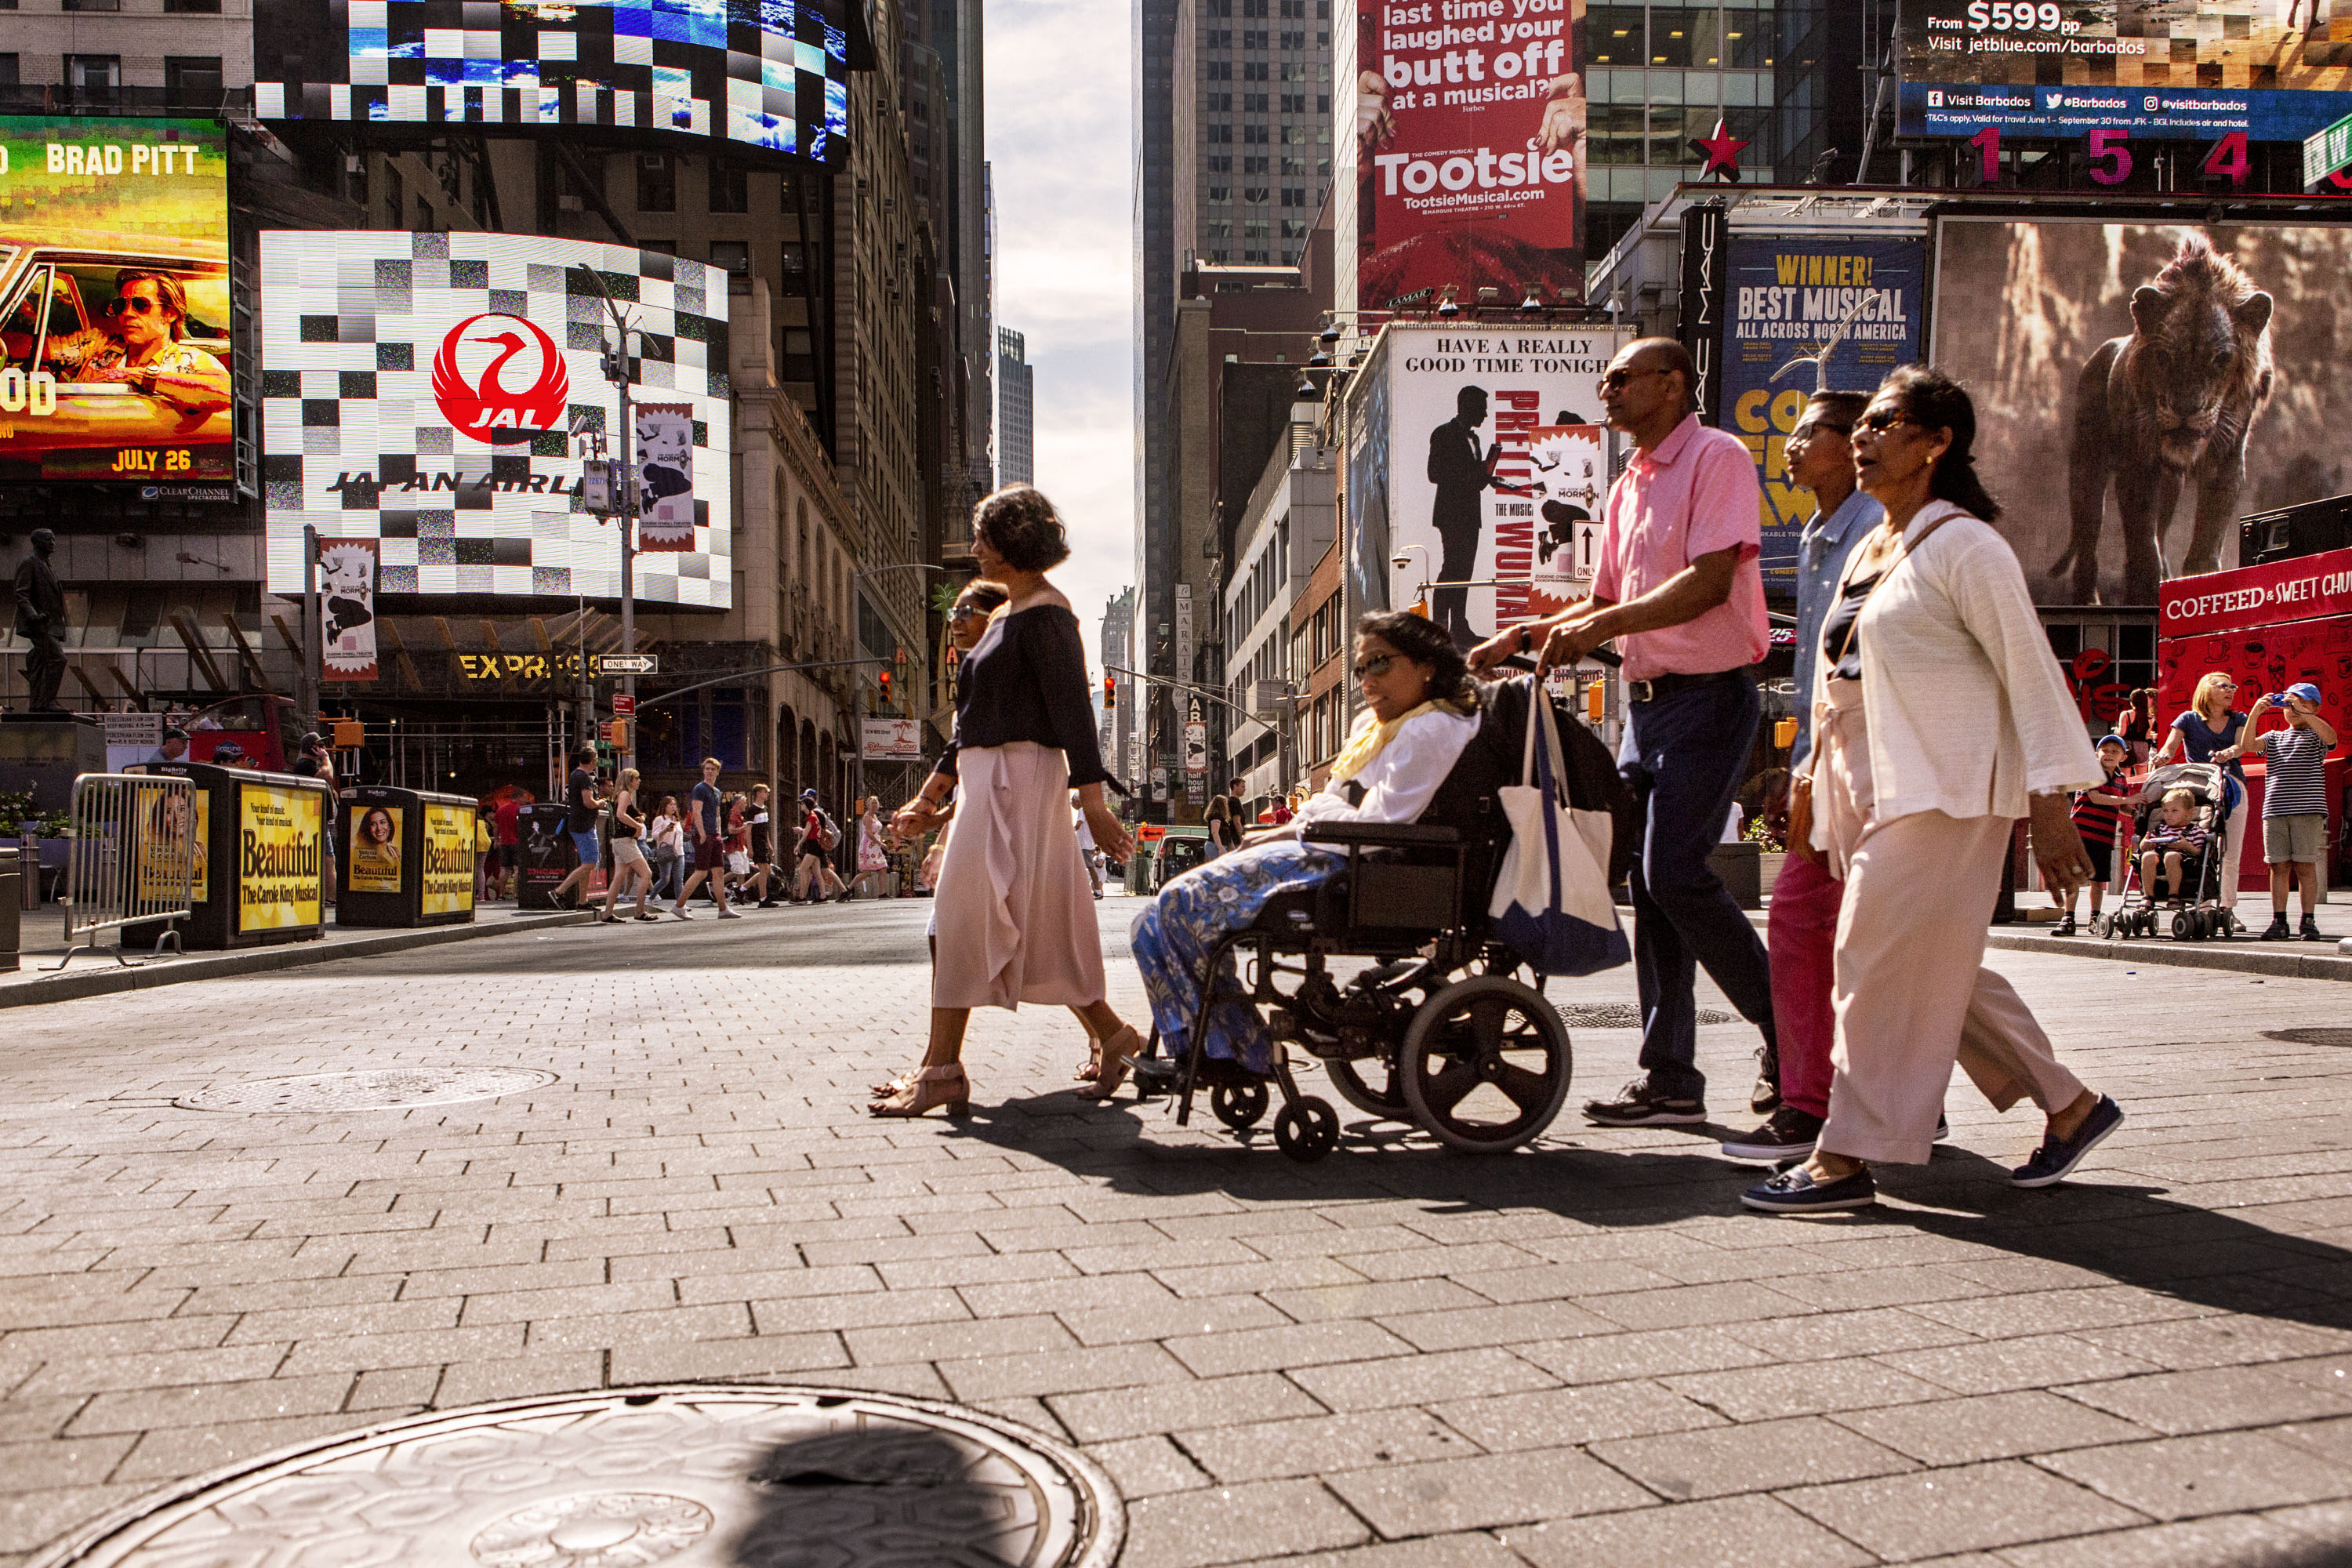 Lakshmee Lachhman-Persad and her sister Annie explore Times Square with their family.